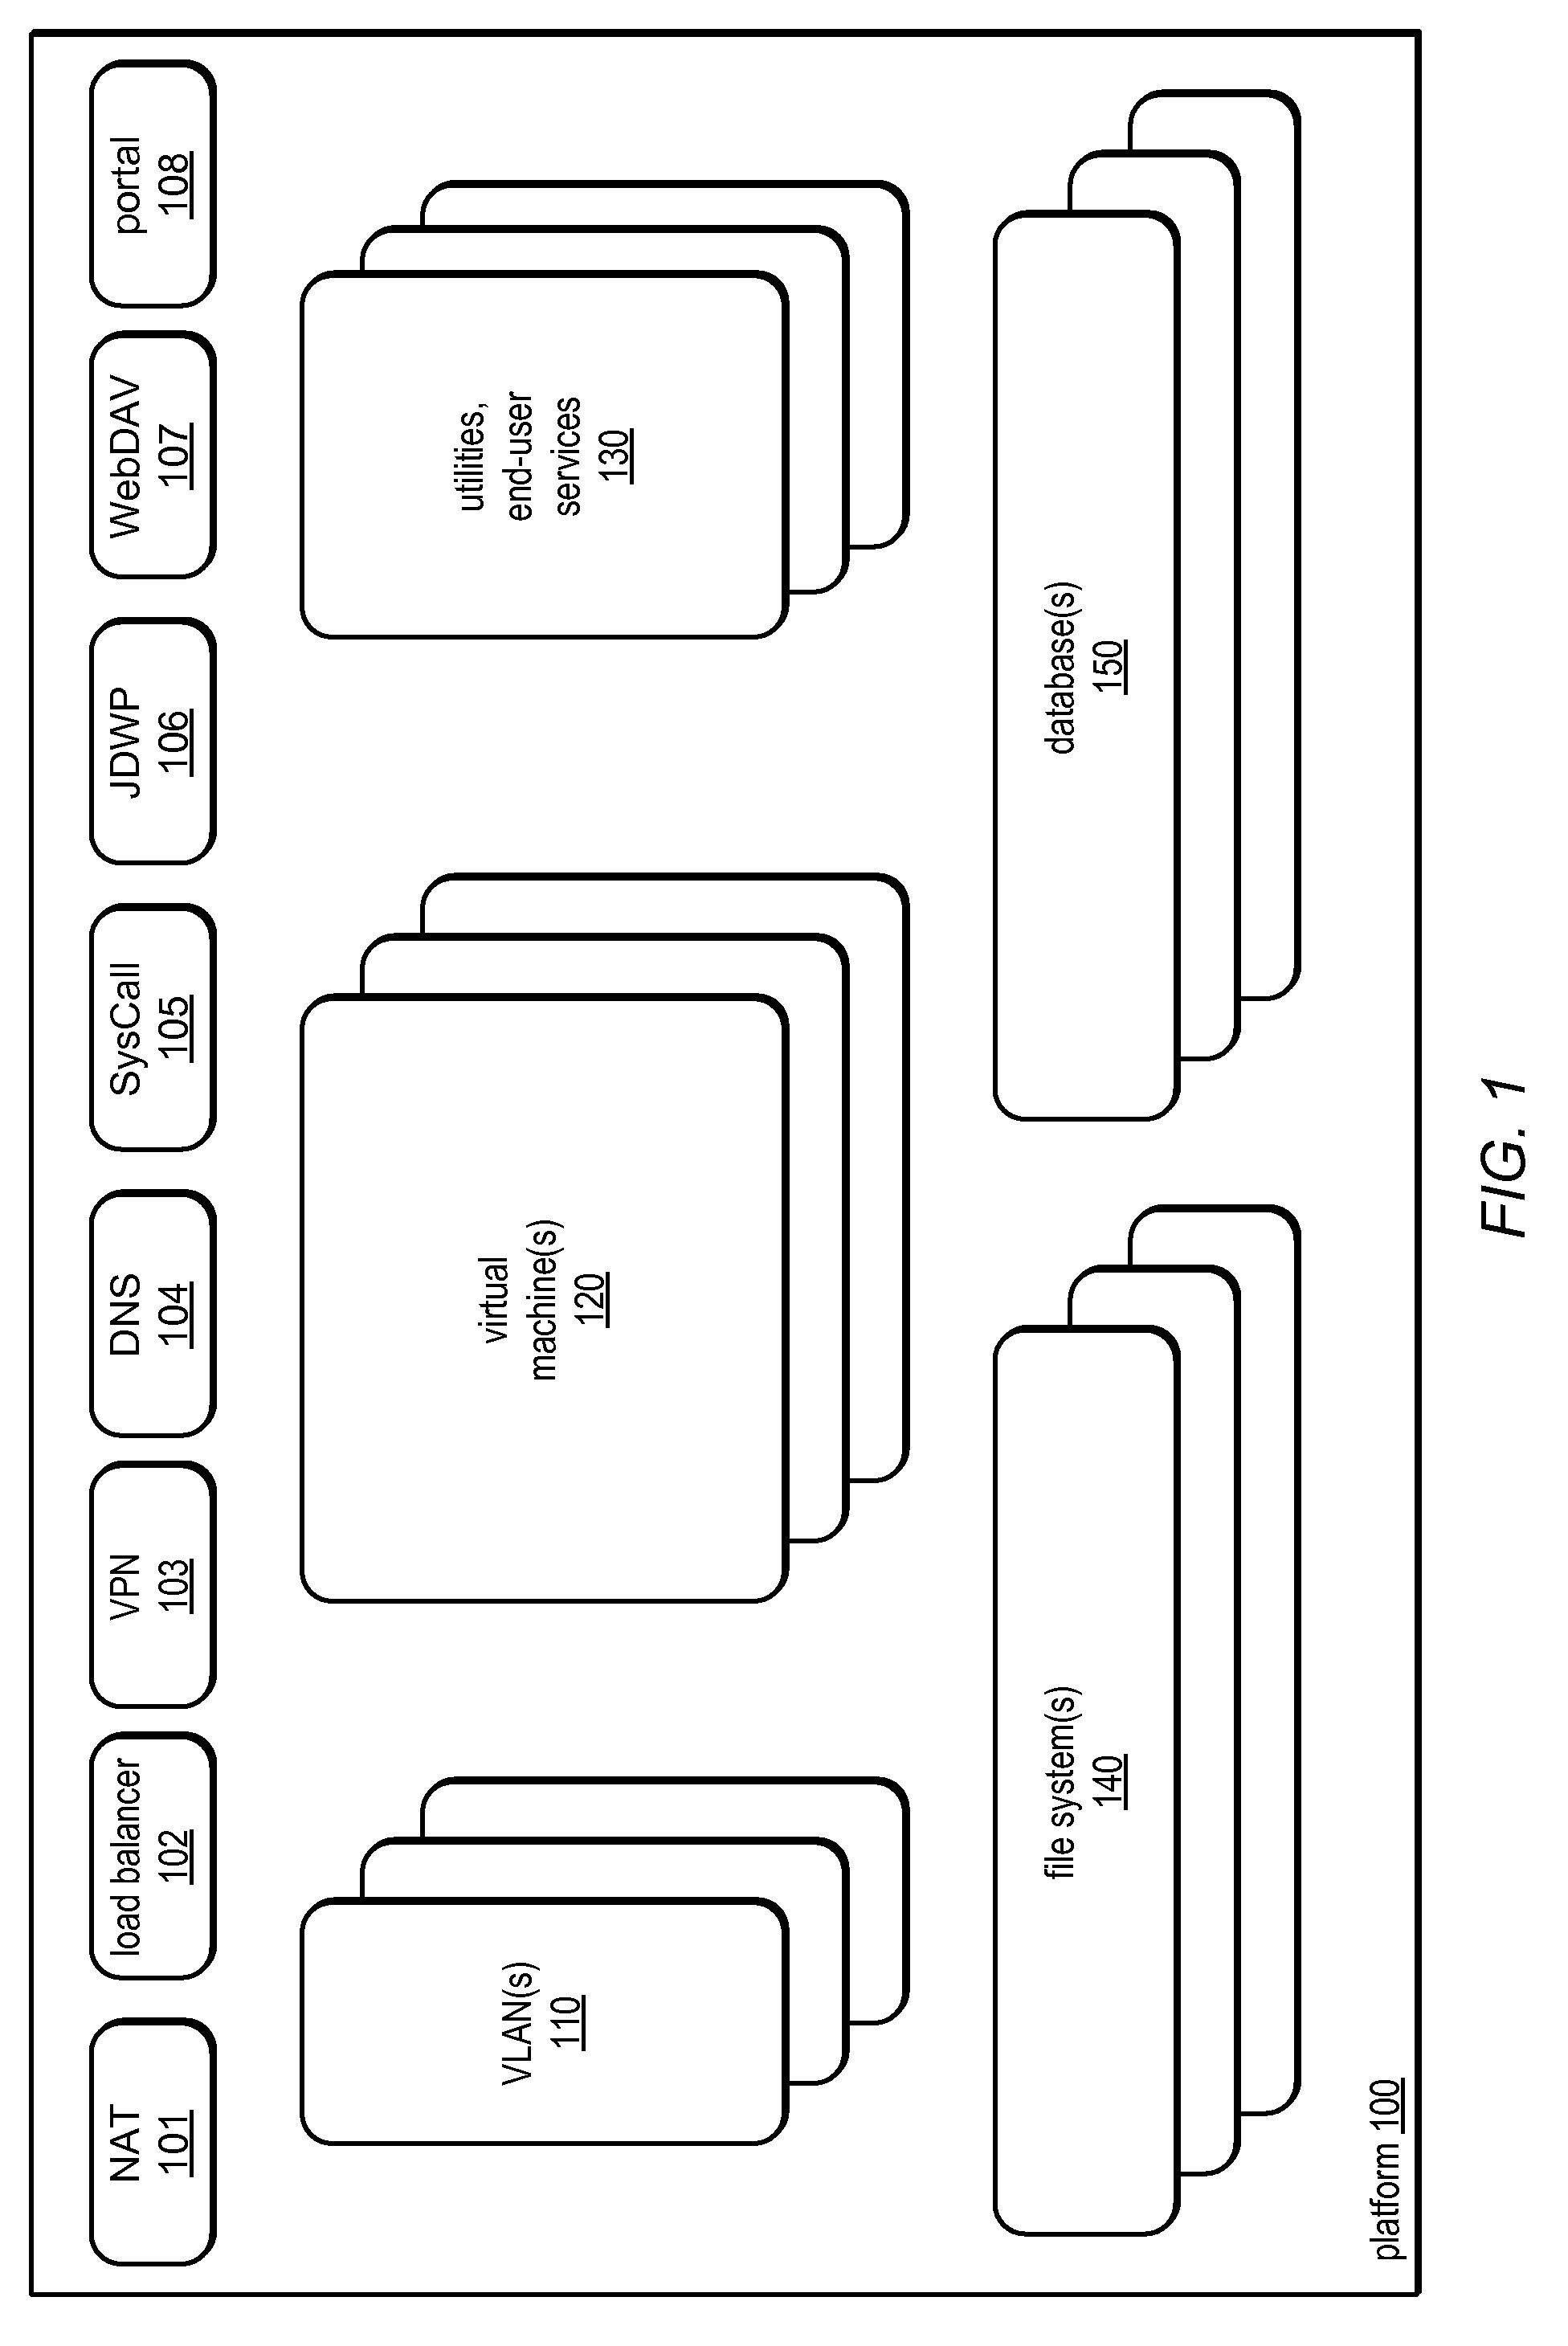 System and method for programmatic management of distributed computing resources